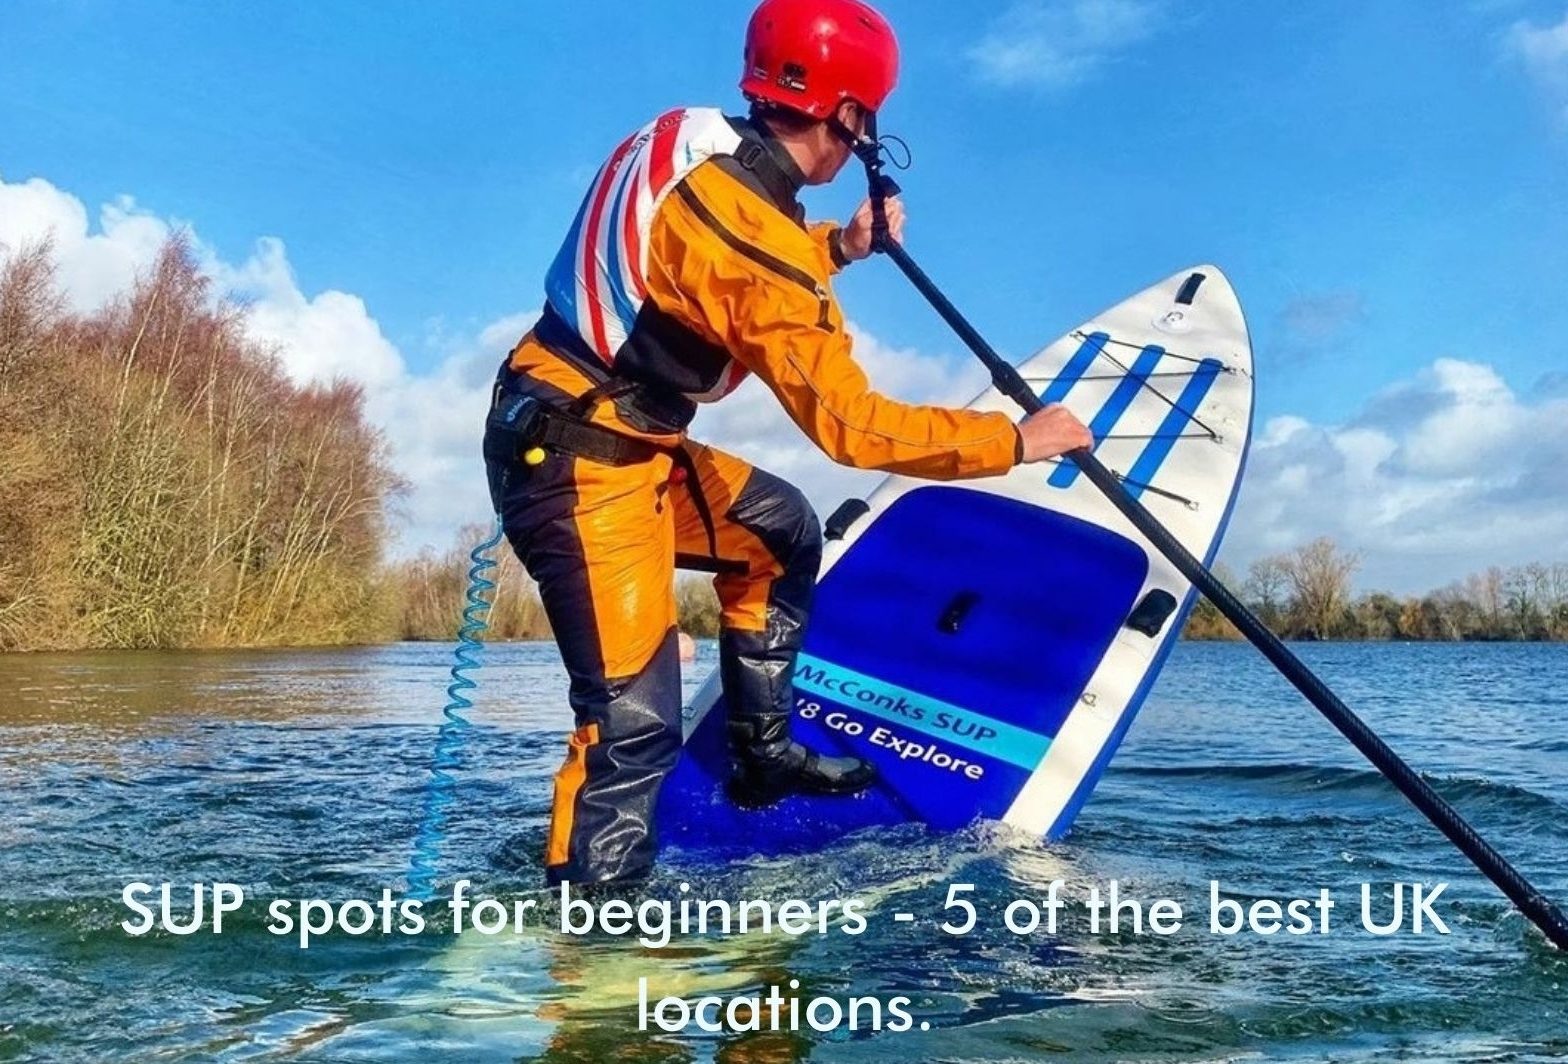 SUP spots for beginners - 5 of the best UK locations.